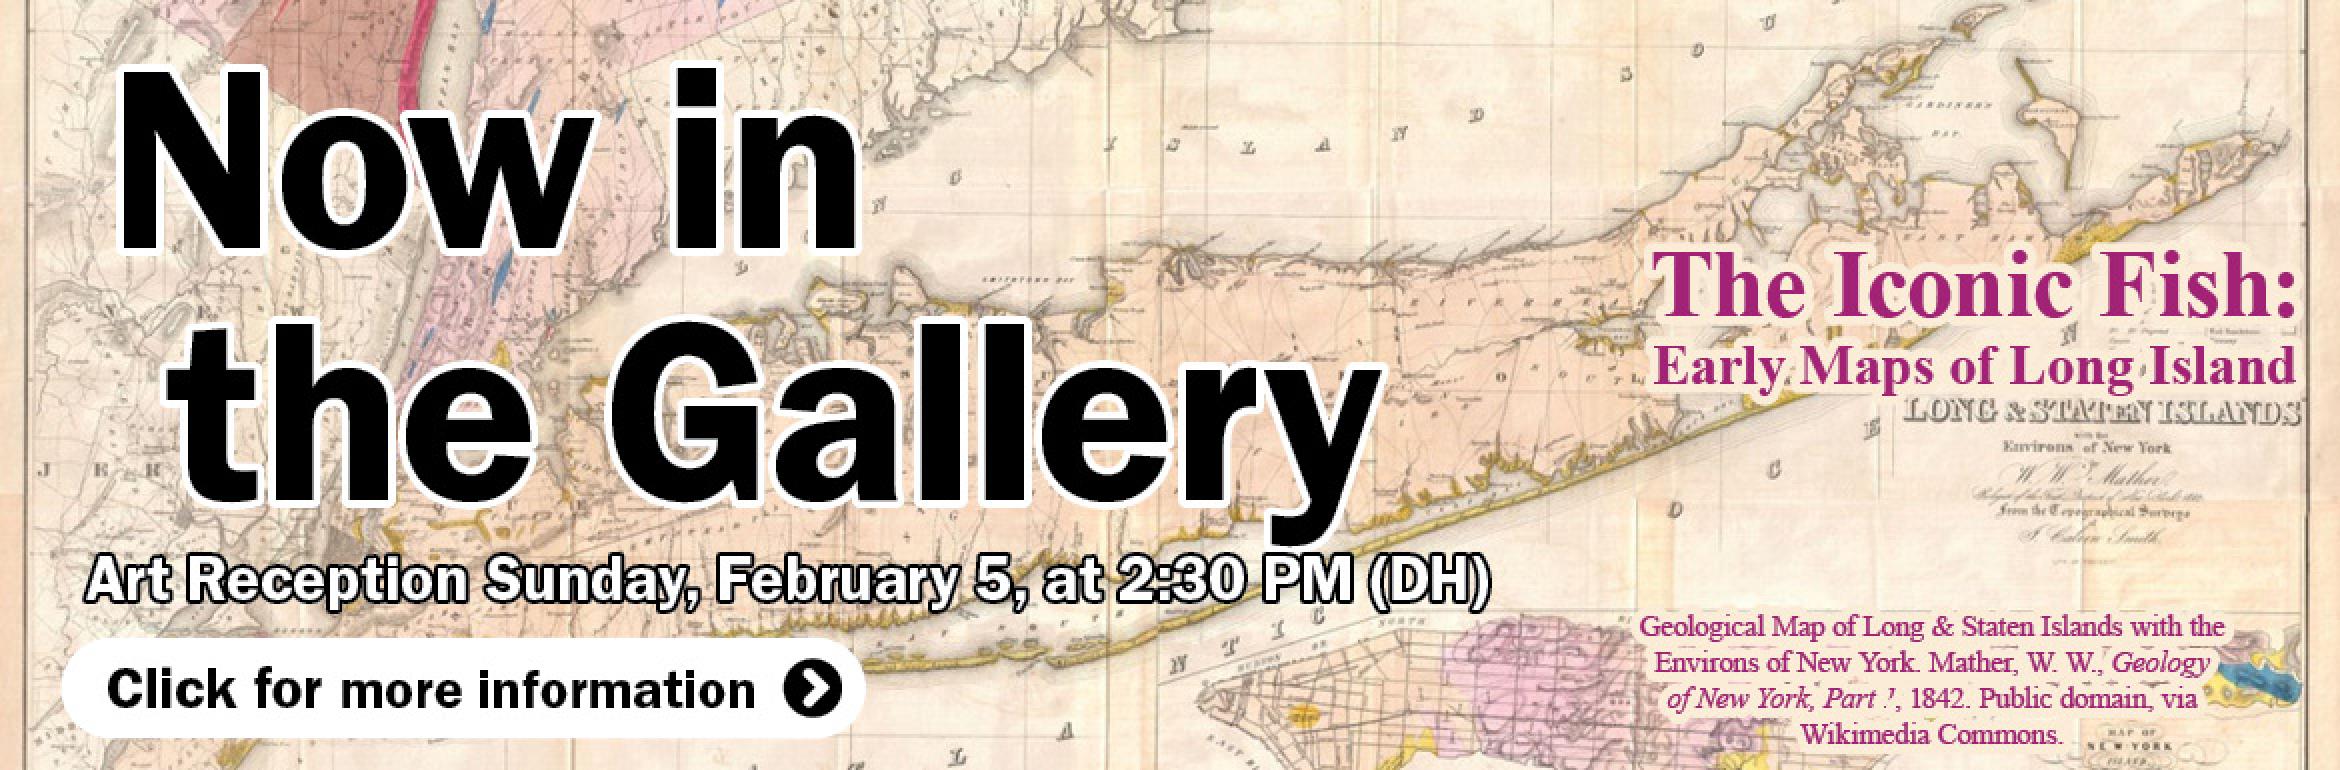 Now in  the Gallery. Art Reception Sunday, February 5, at 2:30 PM (DH). The Iconic Fish: Early Maps of Long Island. Geological Map of Long & Staten Islands with the Environs of New York. Mather, W. W., Geology of New York, Part 1, 1842. Public domain, via Wikimedia Commons. Click for more information.